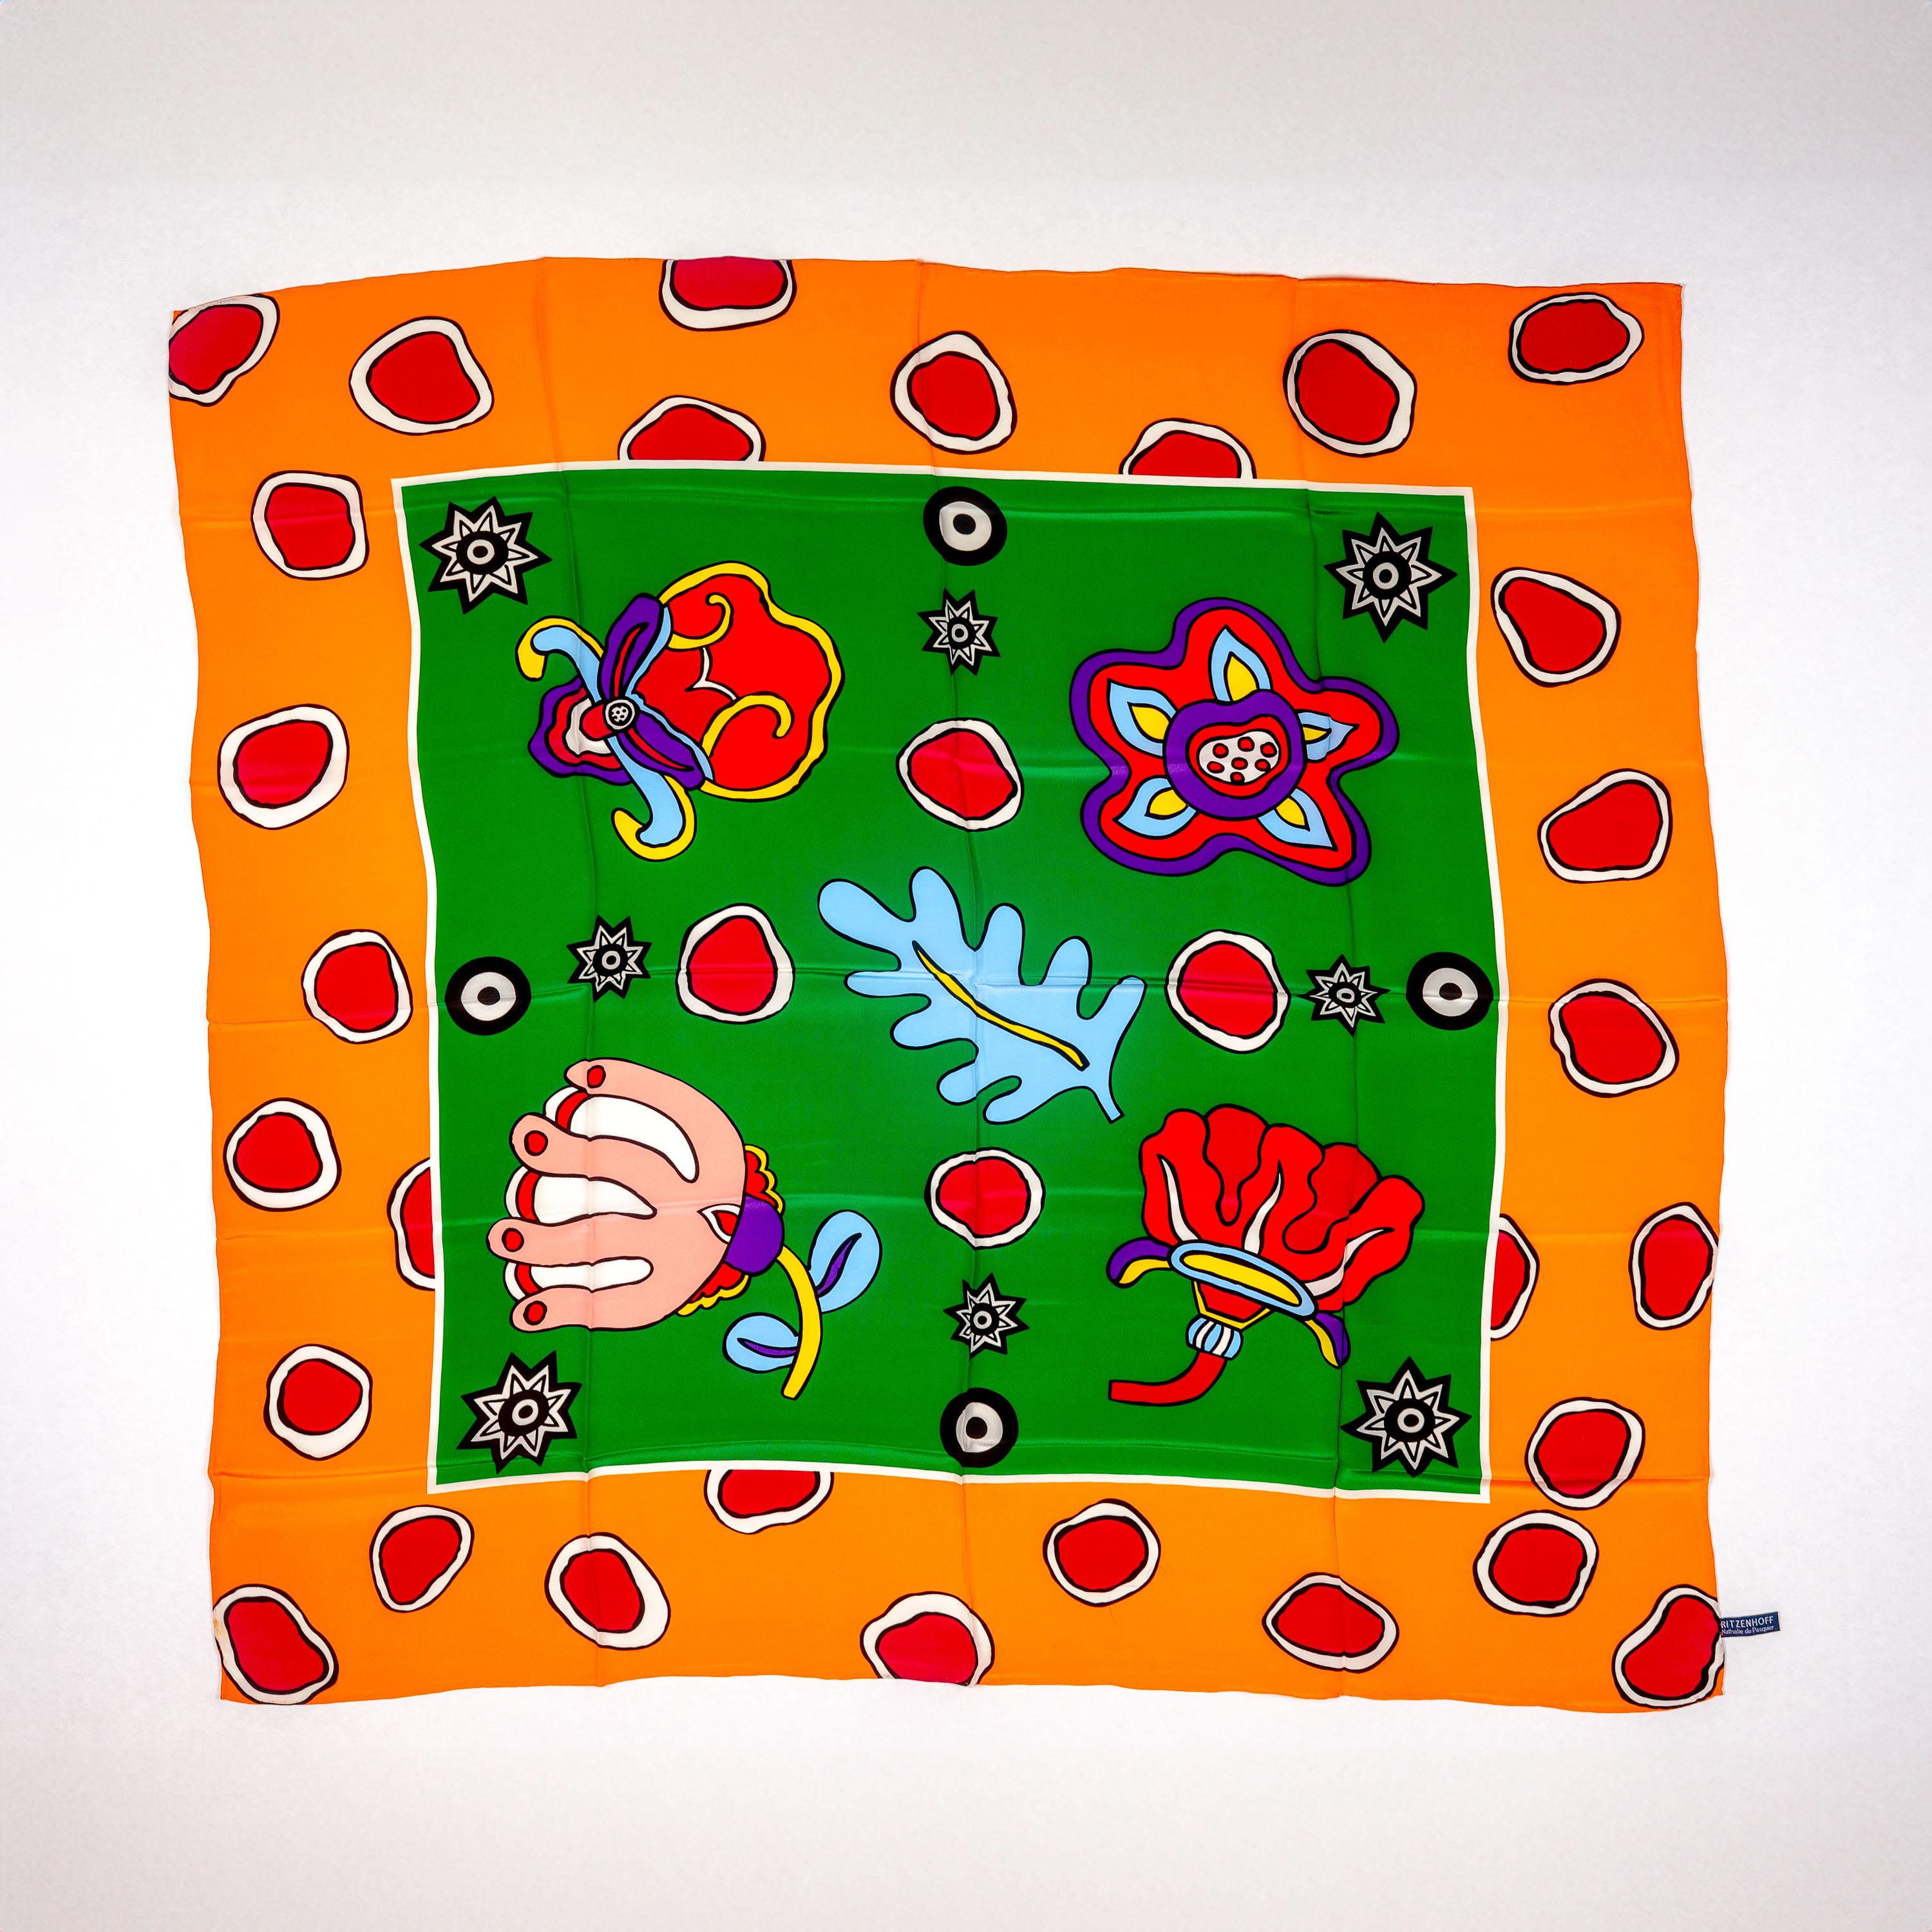 Floral Memphis silk scarf by Nathalie du Pasquier, circa 1980s, made by Ritzenhoff (Germany). New, never worn.
This silk scarf features a remarkable Memphis-style design with flowers and stars, characterized by its use of bright, contrasting colors